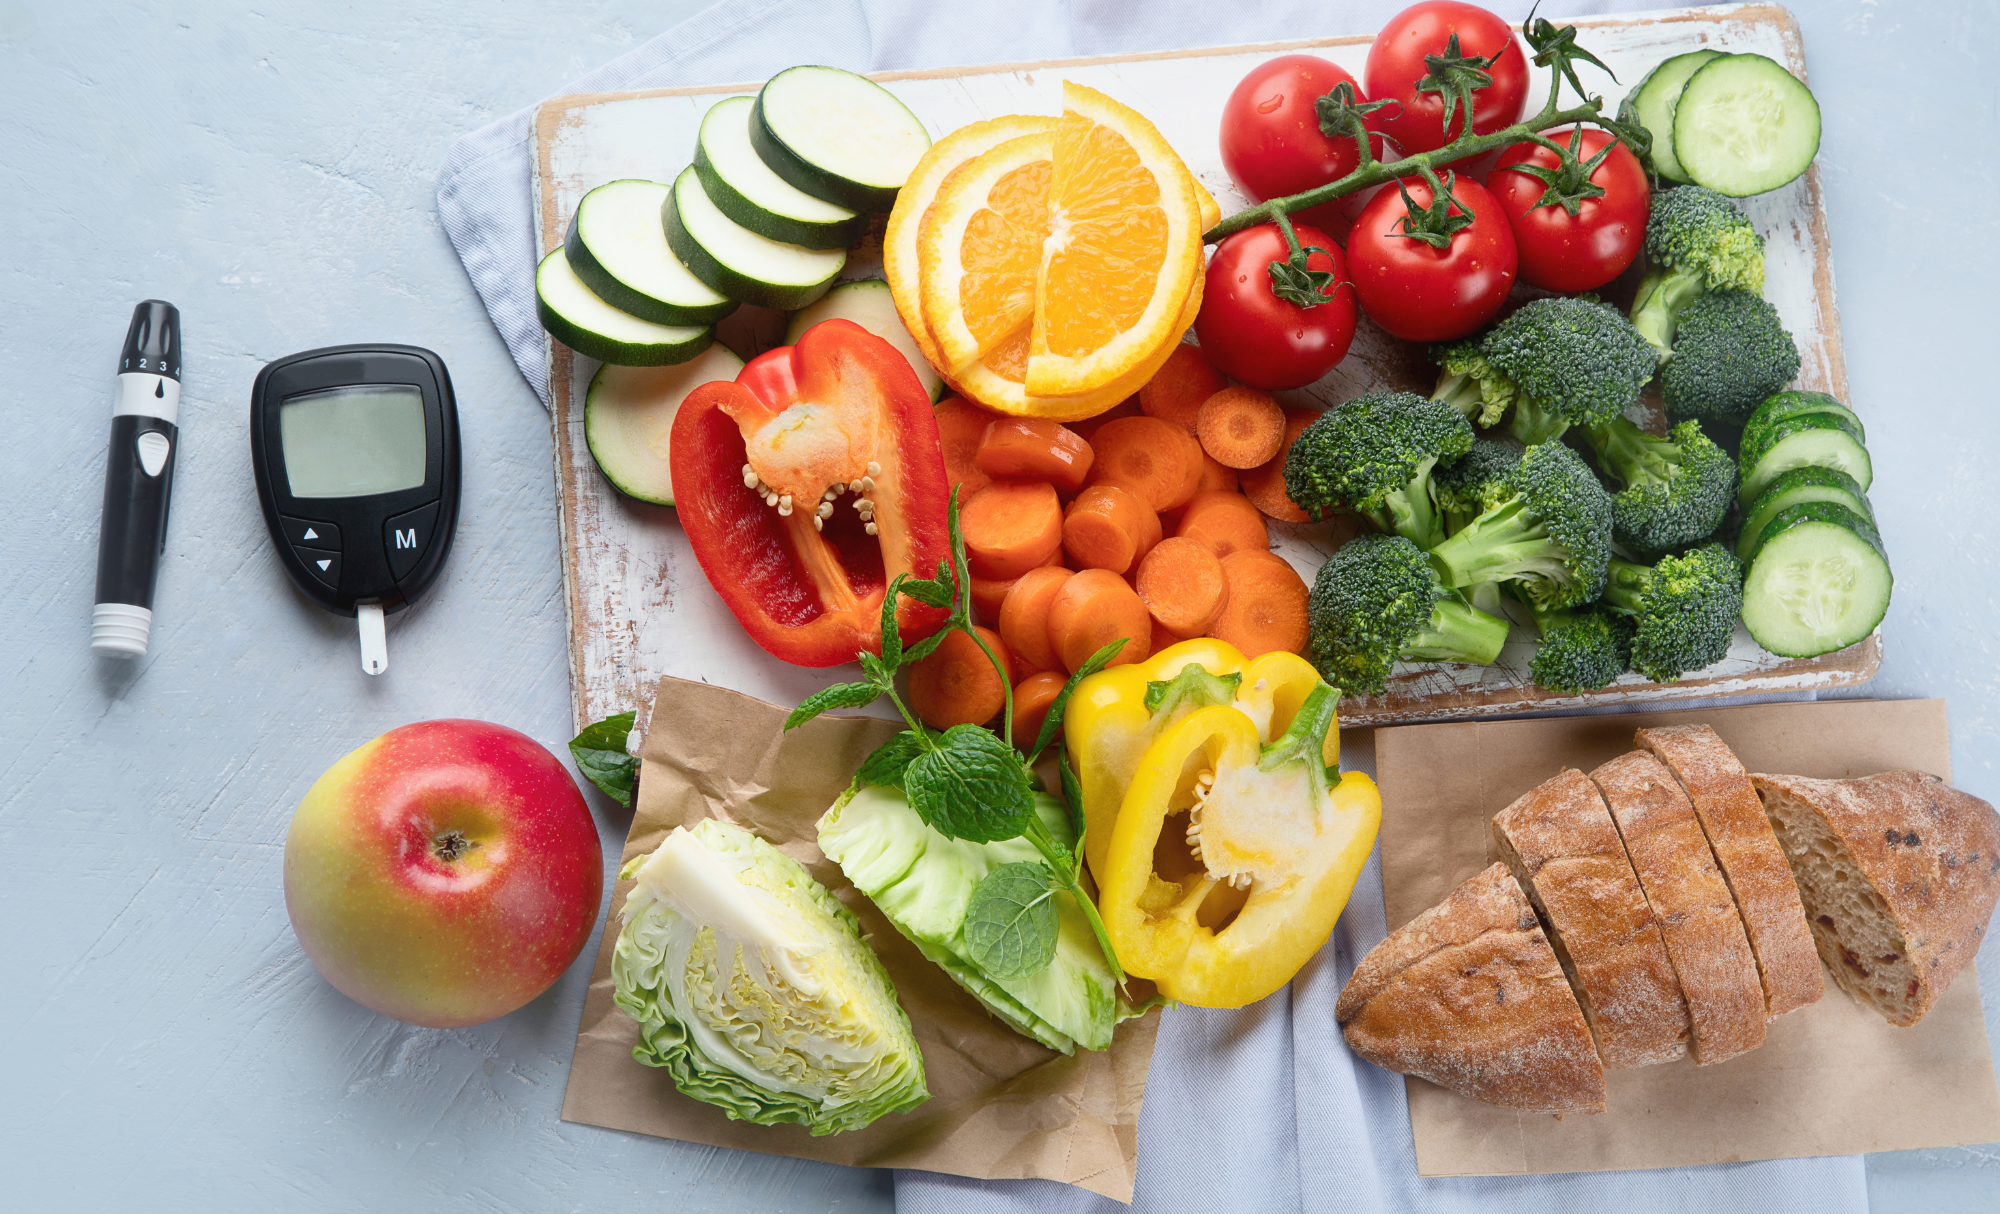 A board with assorted fruits, vegetables and bread. Beside it is a blood sugar reader.